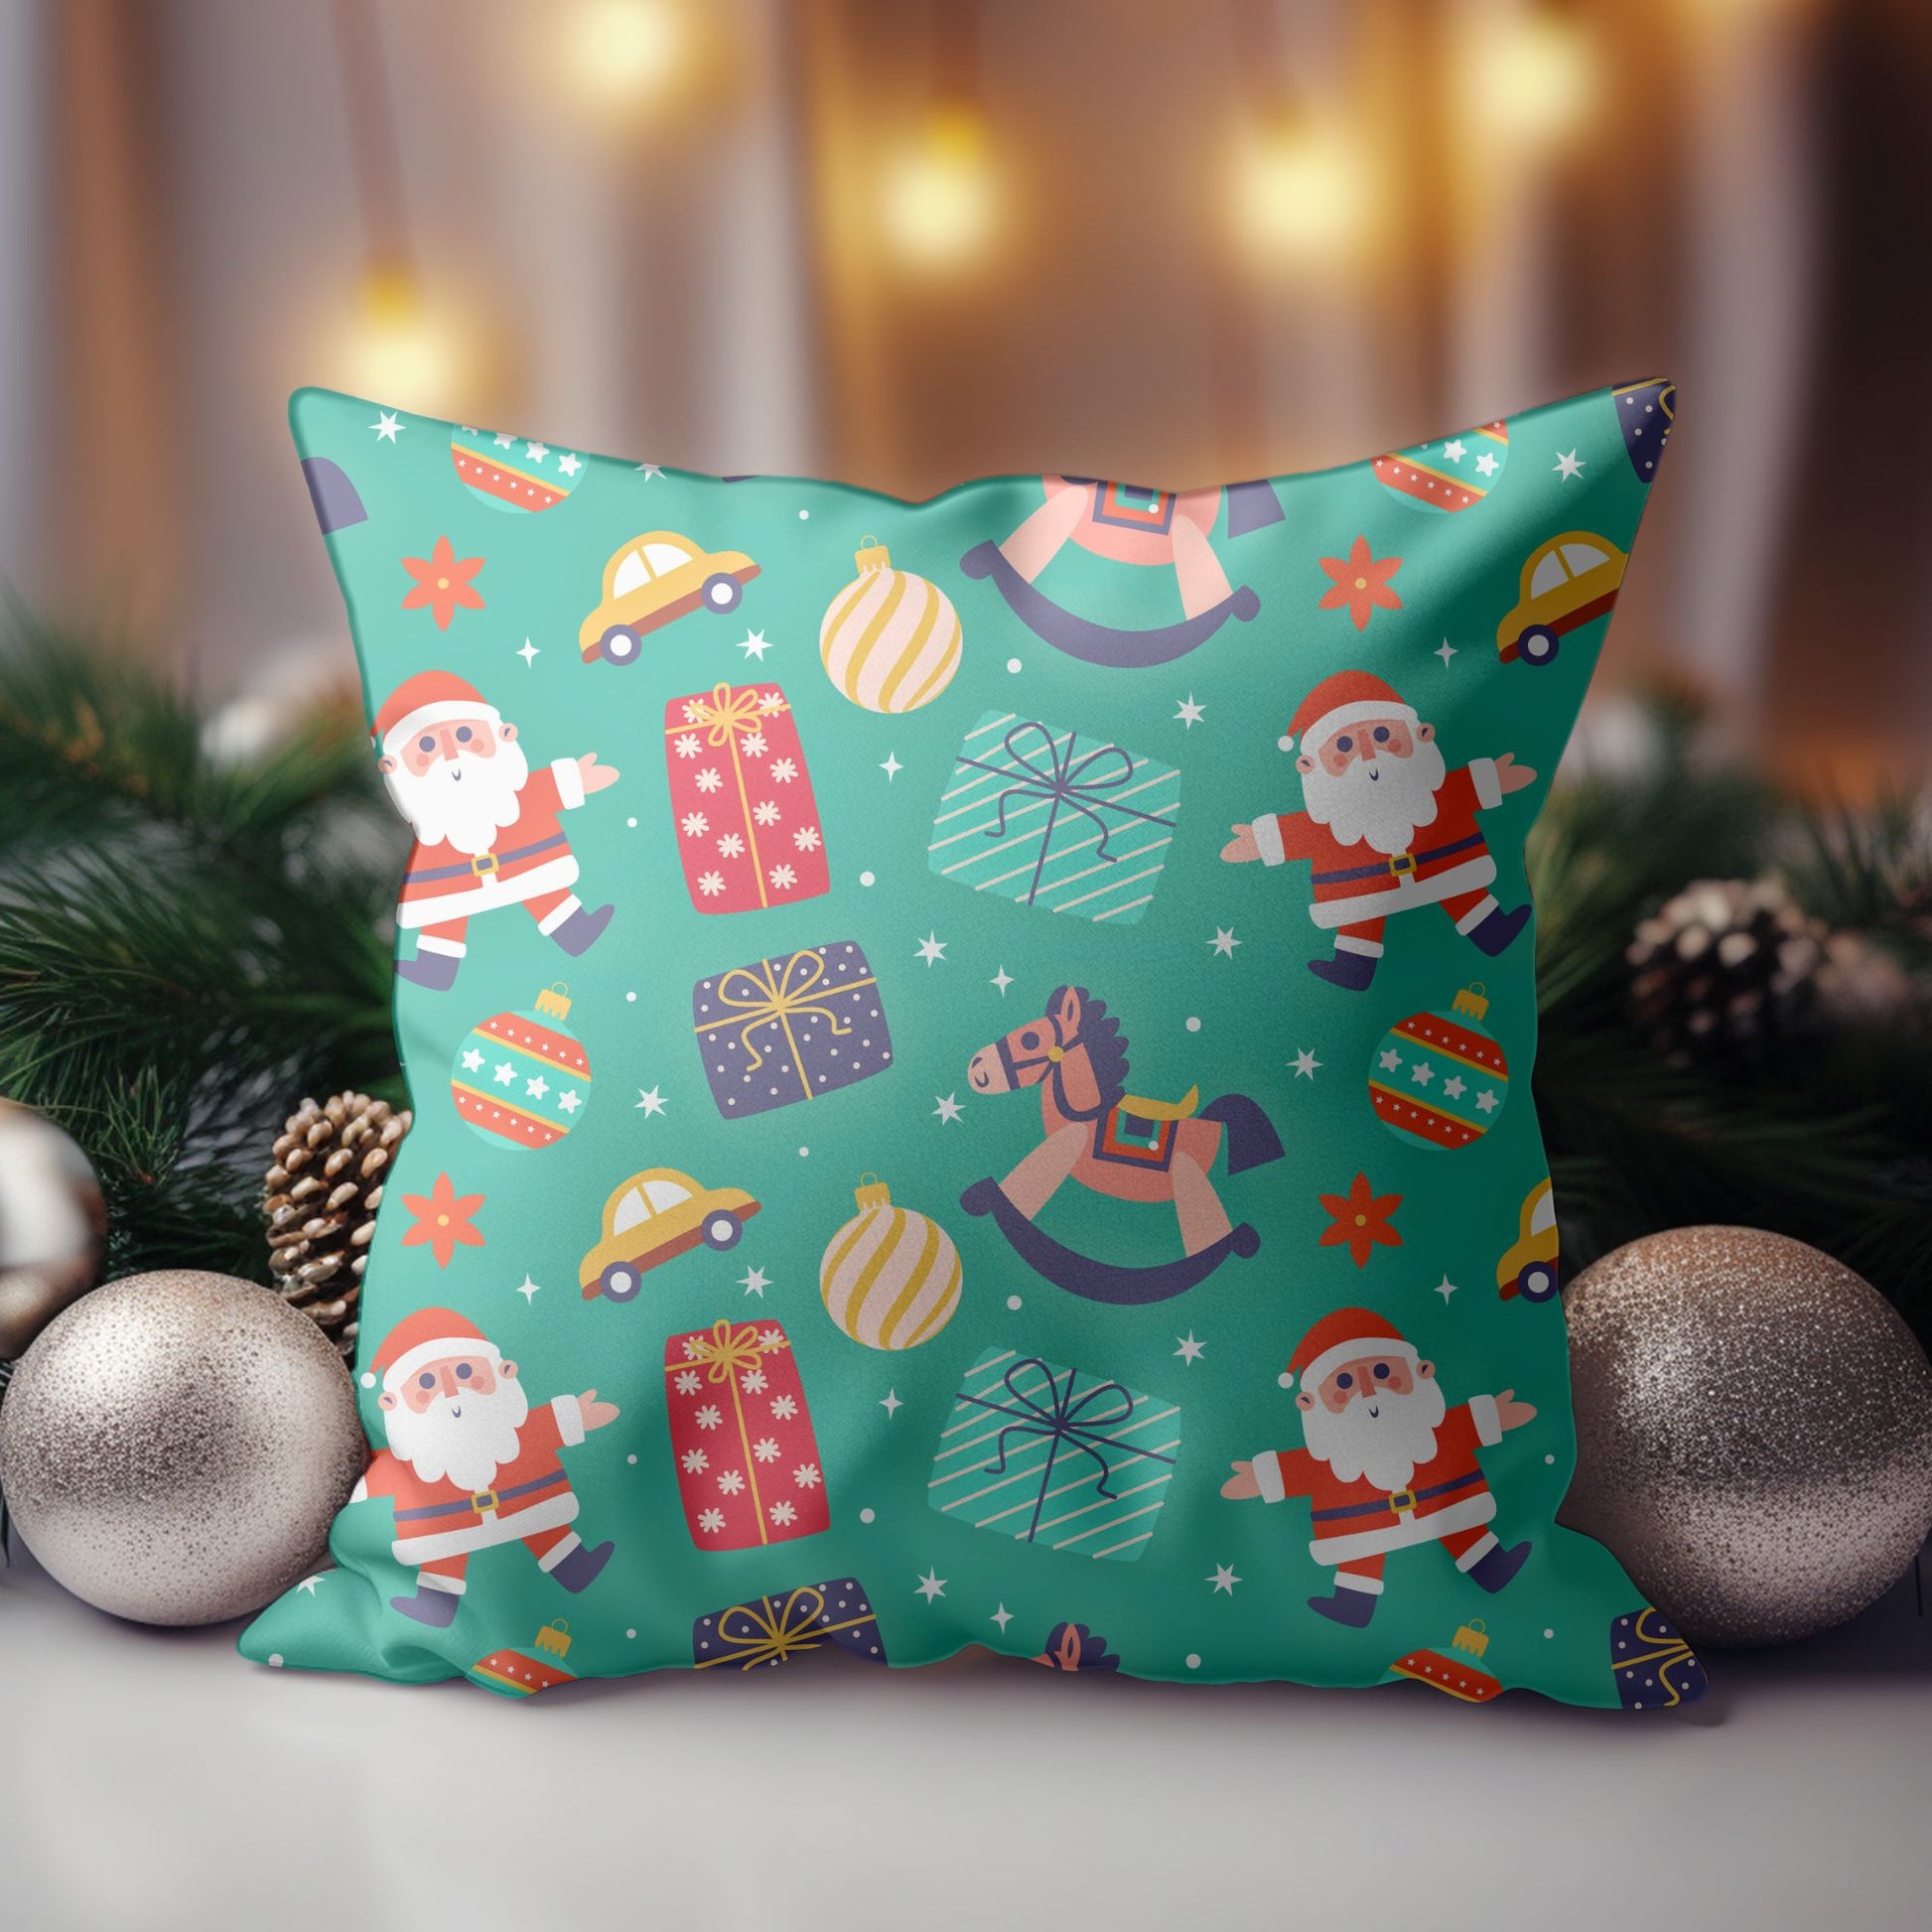 Festive Holiday Pillow for Children's Room in Green